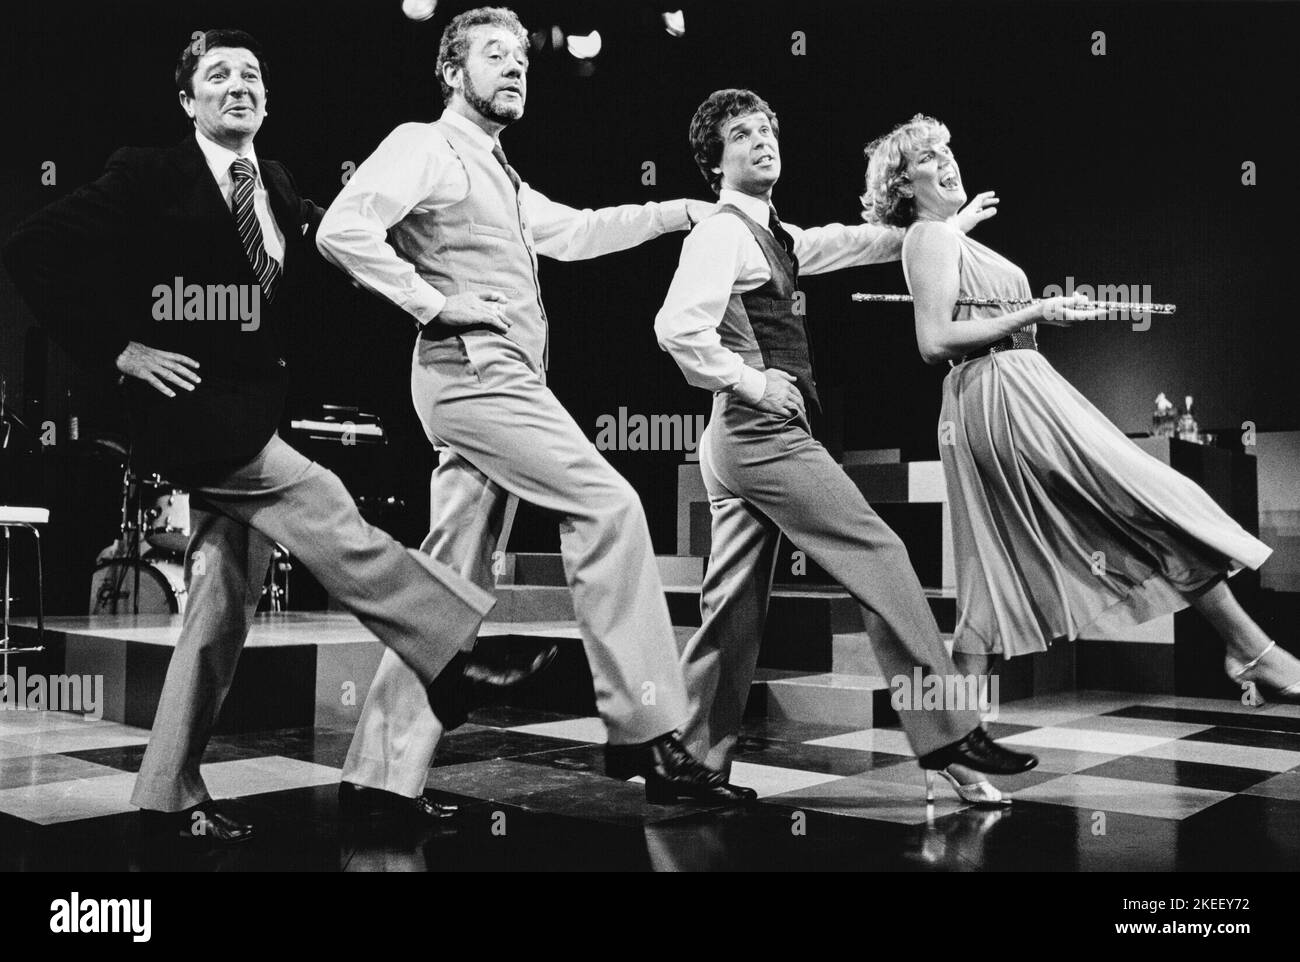 l-r: Robin Ray, Jonathan Adams, Martin Connor and Tricia George in TOMFOOLERY at the Criterion Theatre, London SW1  05/06/1980  words, music & lyrics by Tom Lehrer  compiled by Robin Ray & Cameron Mackintosh  musical director: Chris Walker  design: Adrian Faux  lighting: Andrew Bridge  director: Gillian Lynne Stock Photo